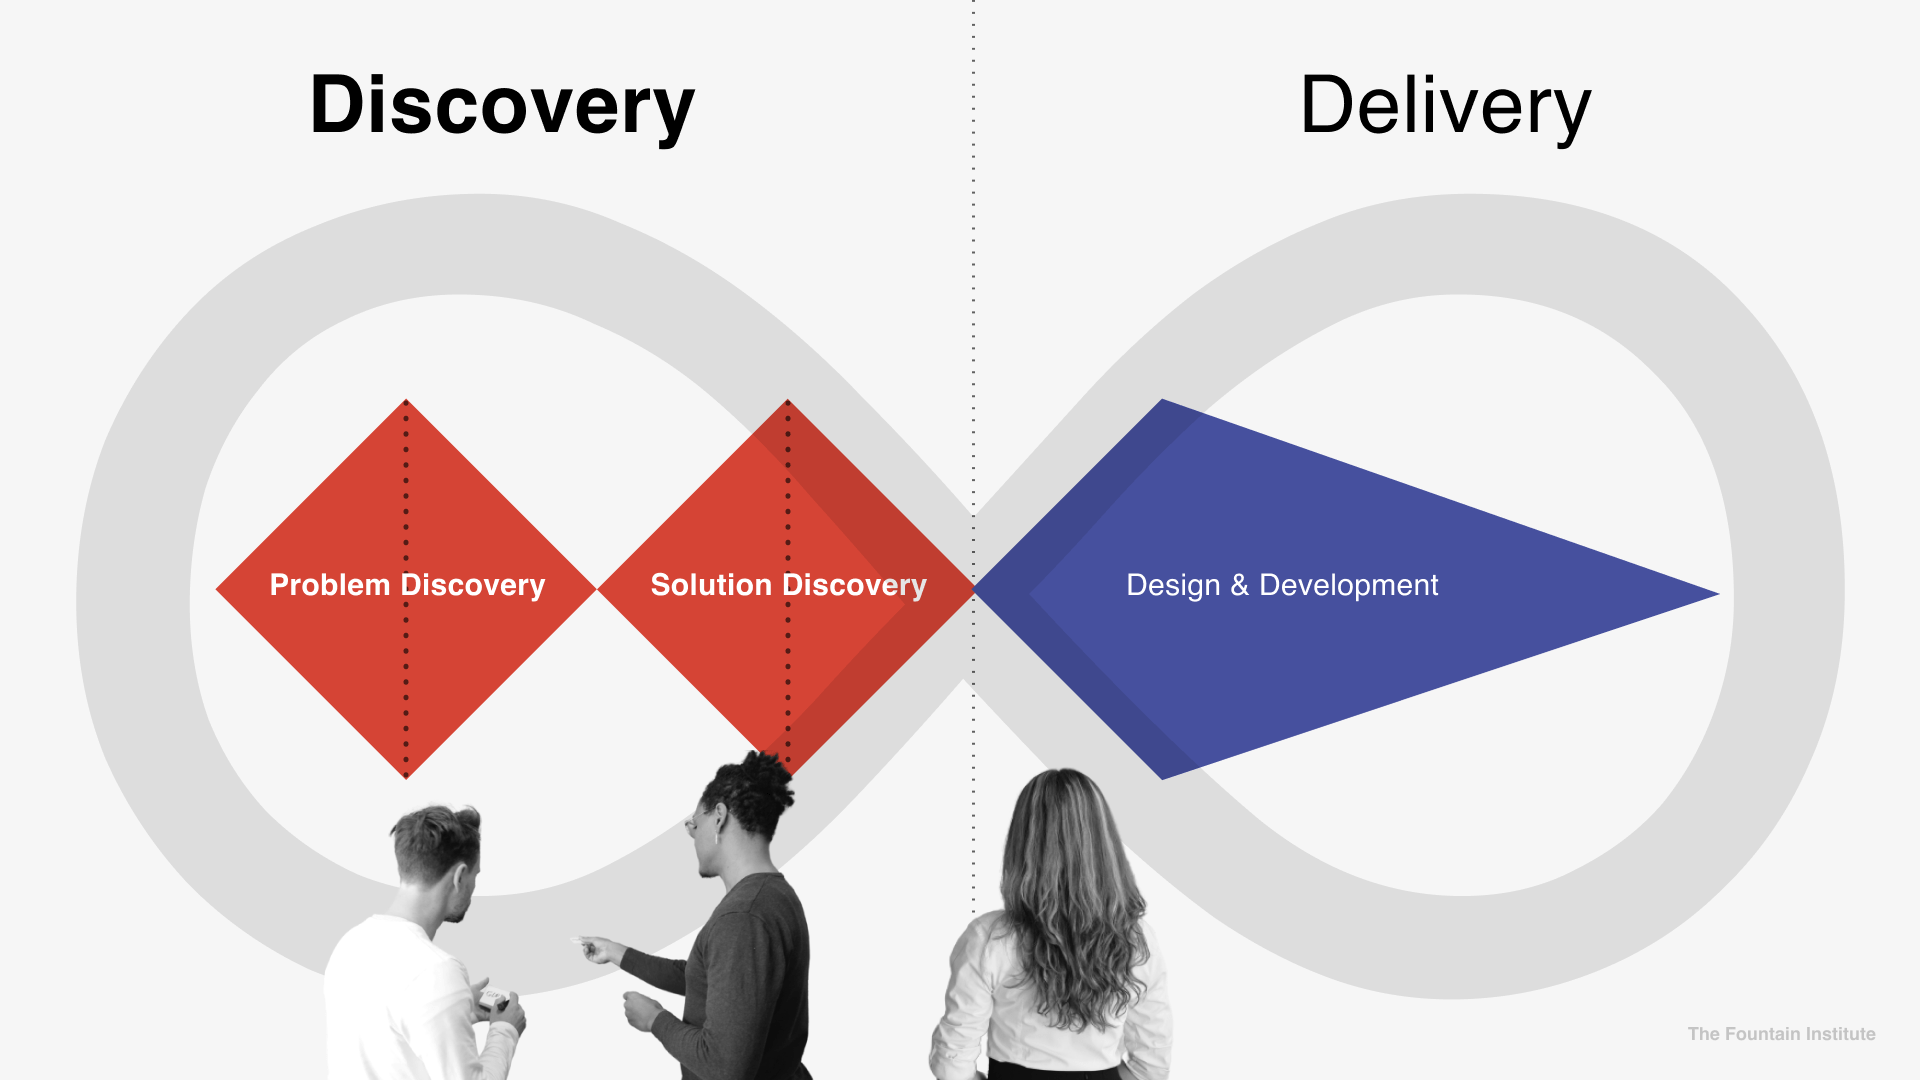 How to Choose the Best Product Discovery Platform for Your Business